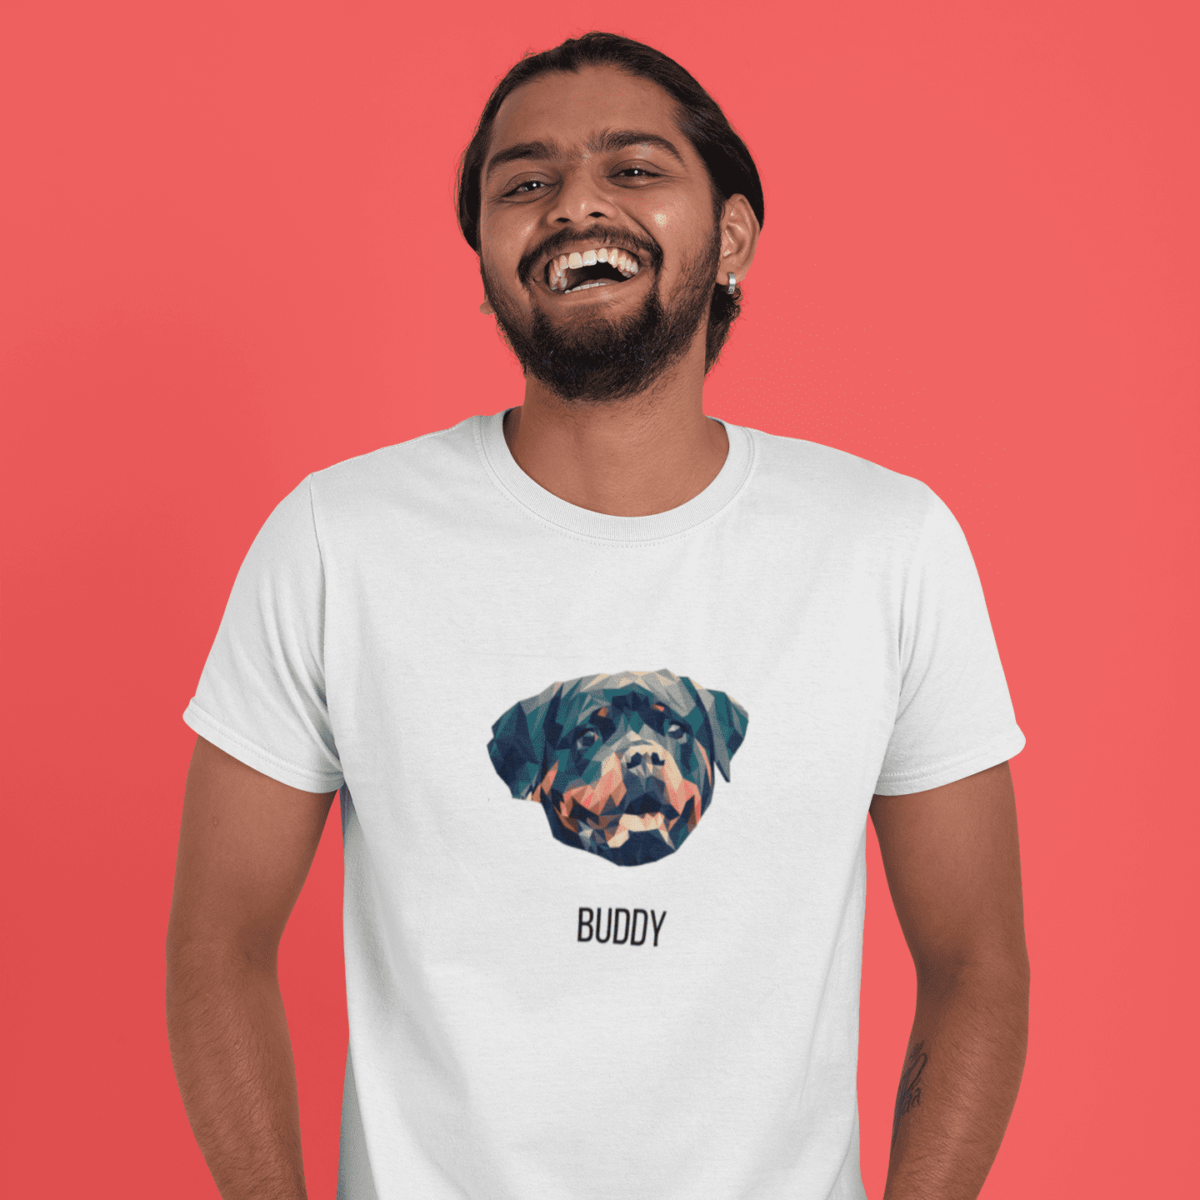 t shirt mockup of a bearded man laughing at a studio 29105 8 1